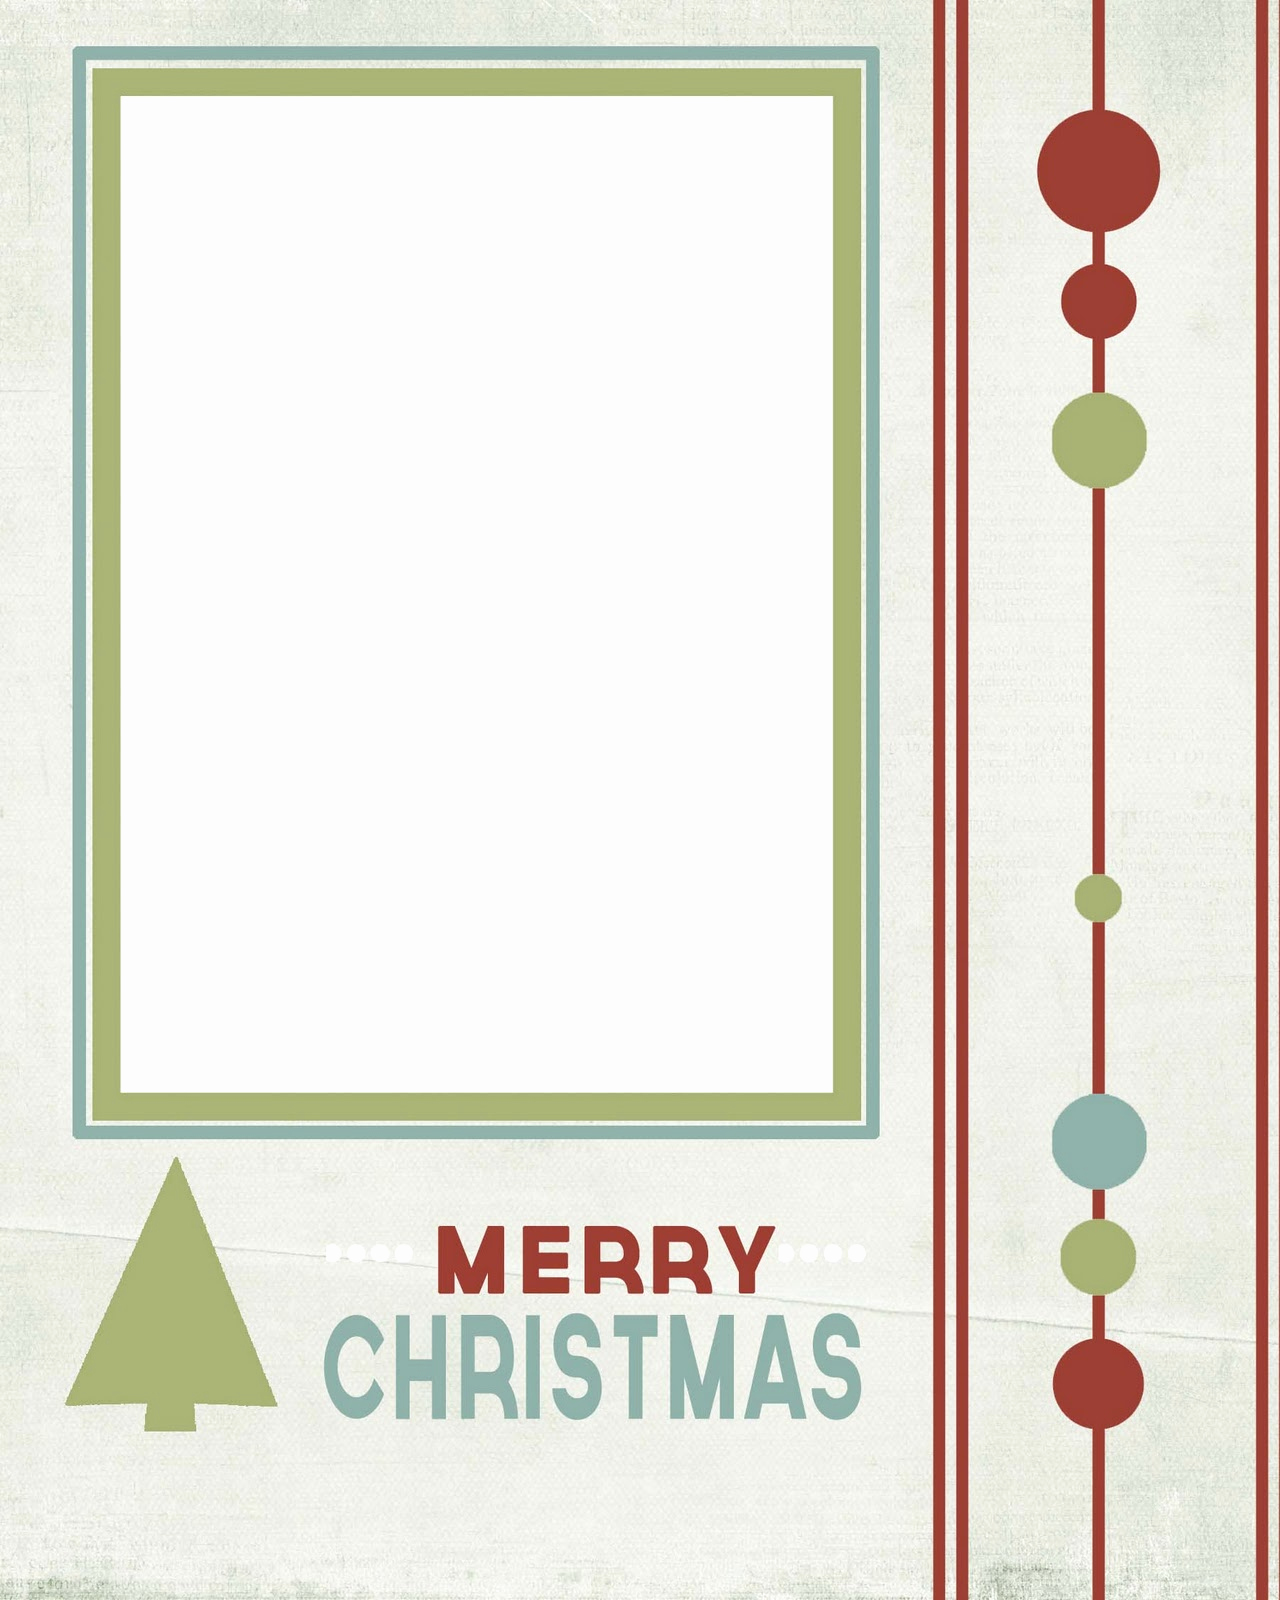 Free Photo Christmas Card Templates Lovely Lovely Little Snippets Christmas Card Display and 5 Free